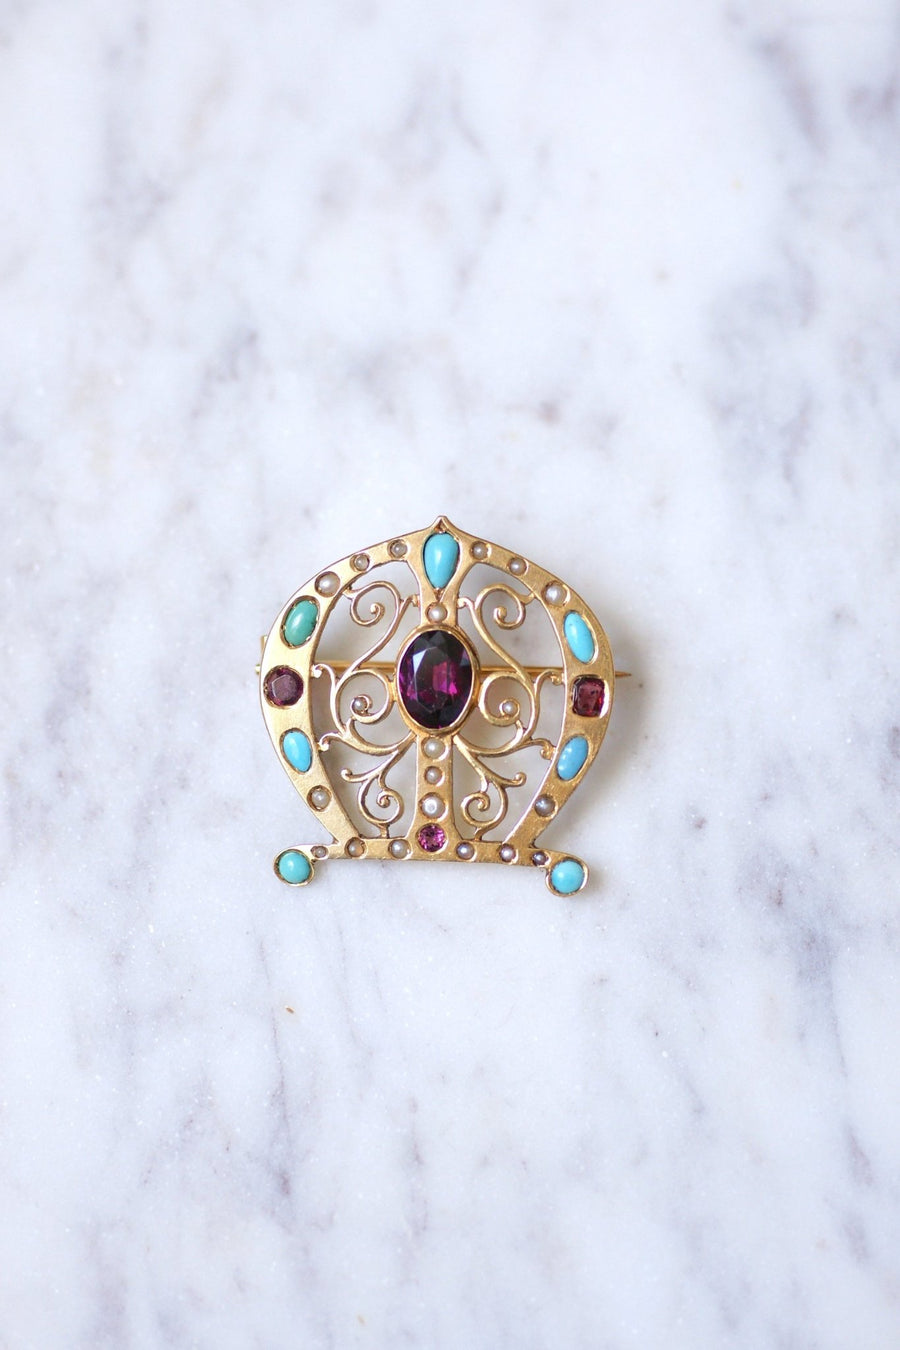 Antique horseshoe brooch in gold, turquoise, pearls and garnets - Galerie Pénélope